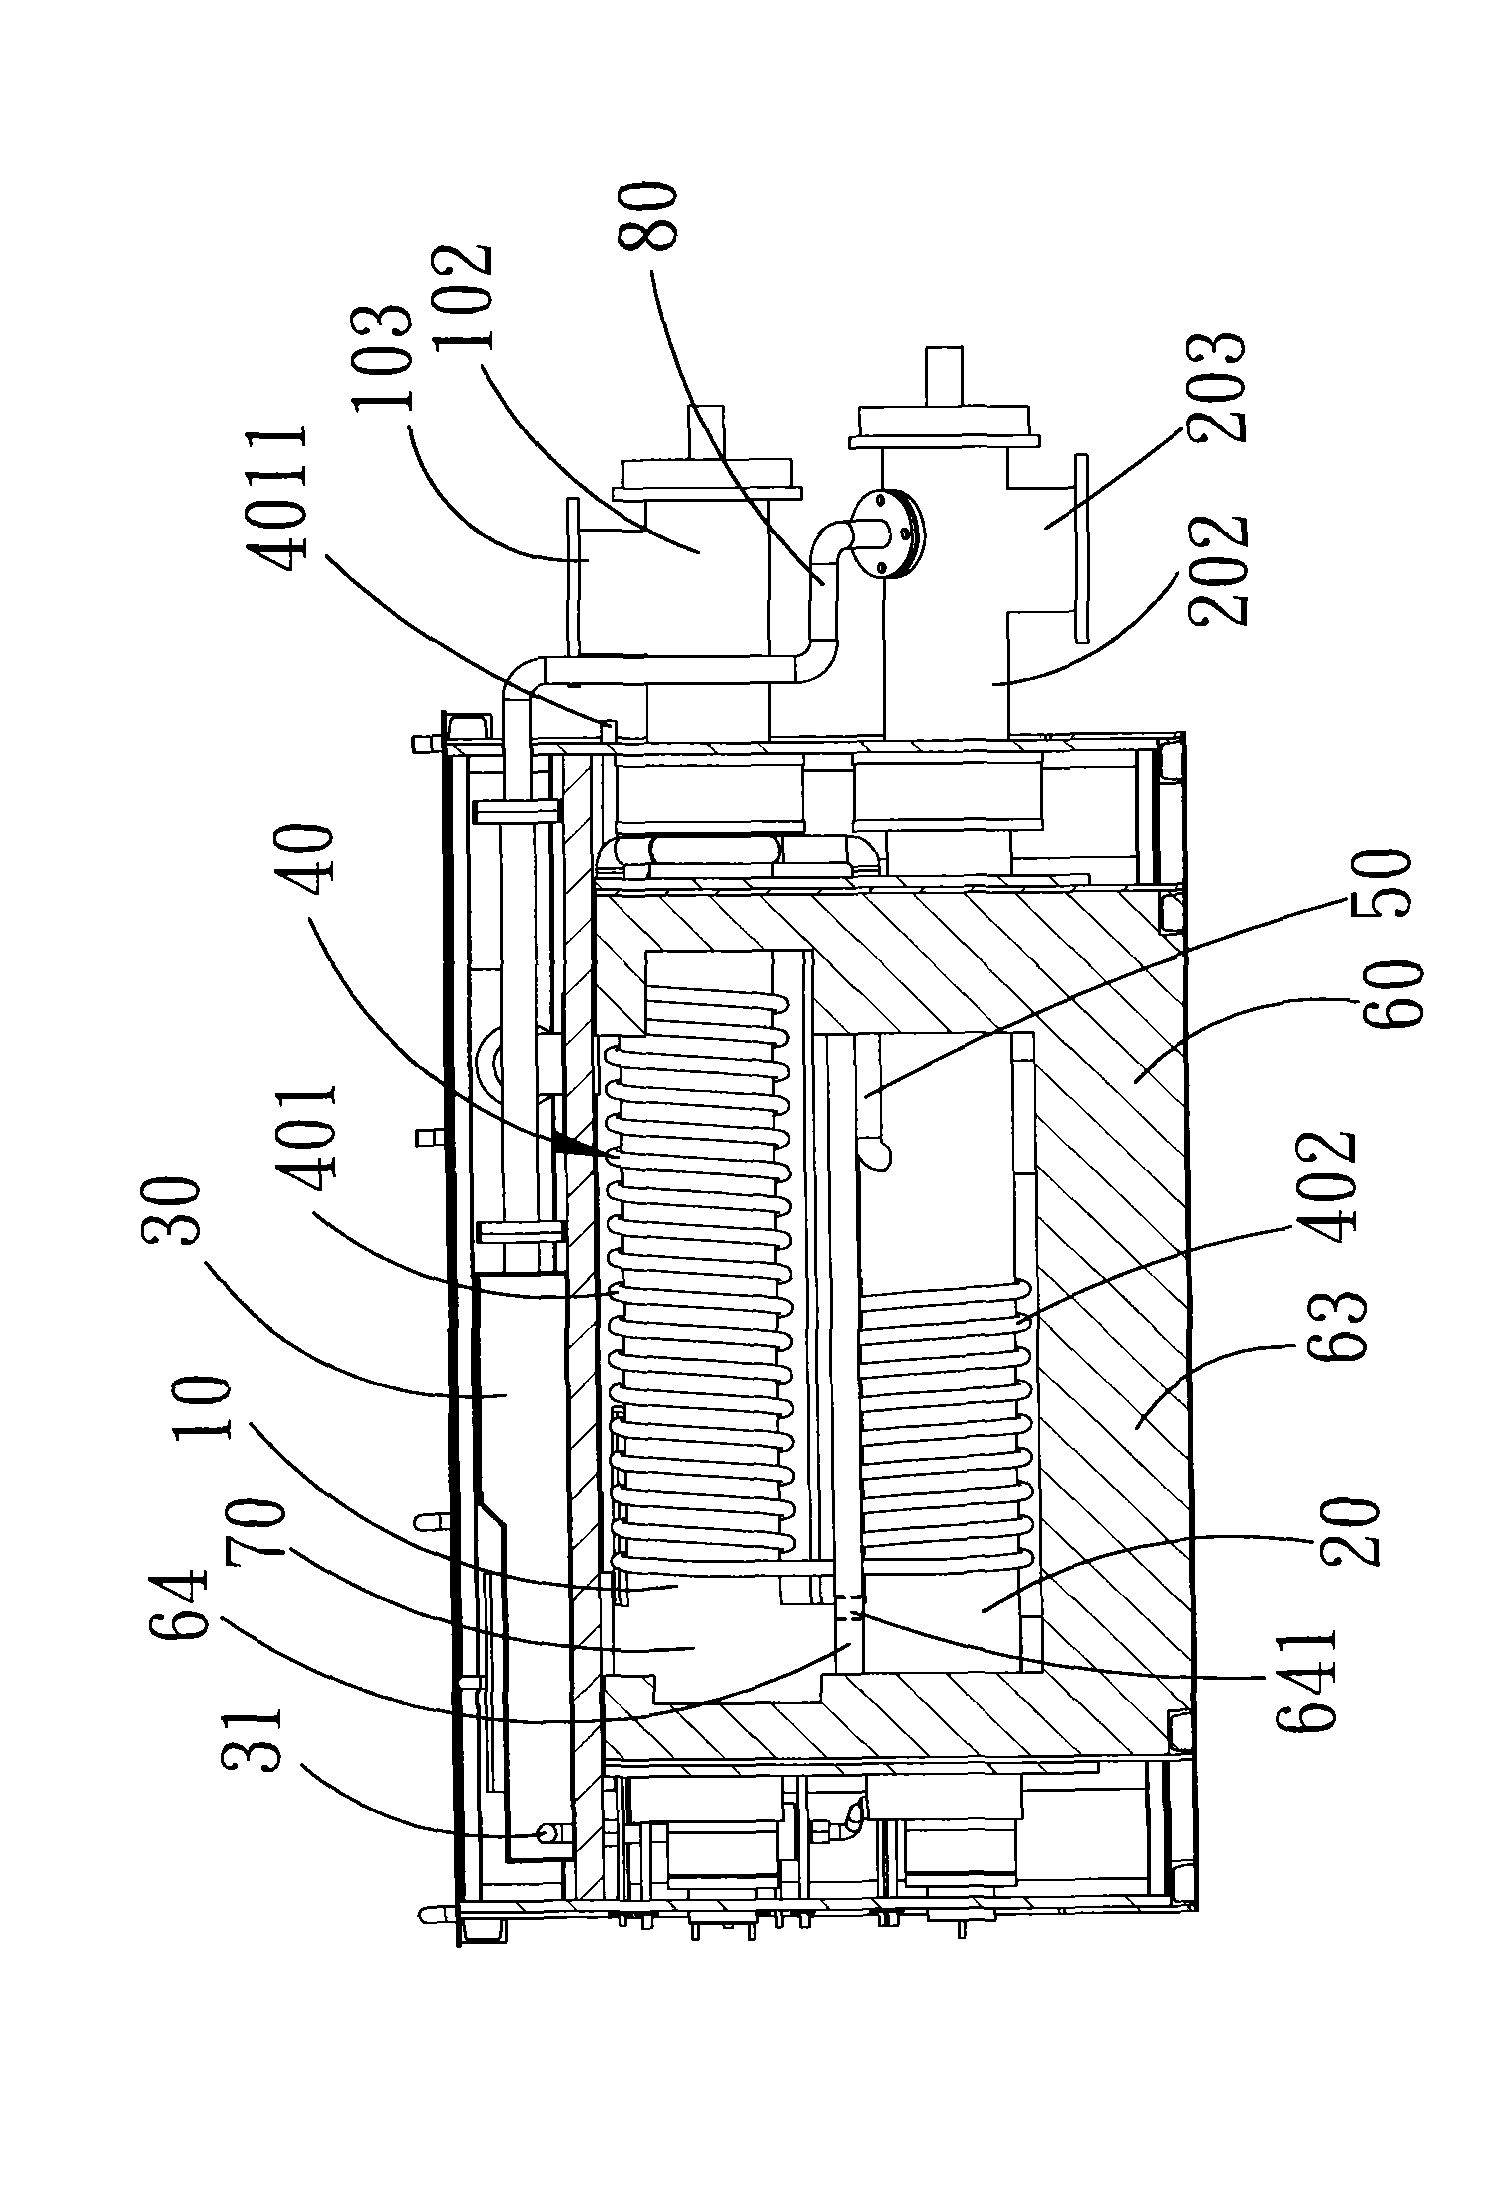 Reaction furnace device for decomposing substances to be treated by utilizing high temperature steam and heat source